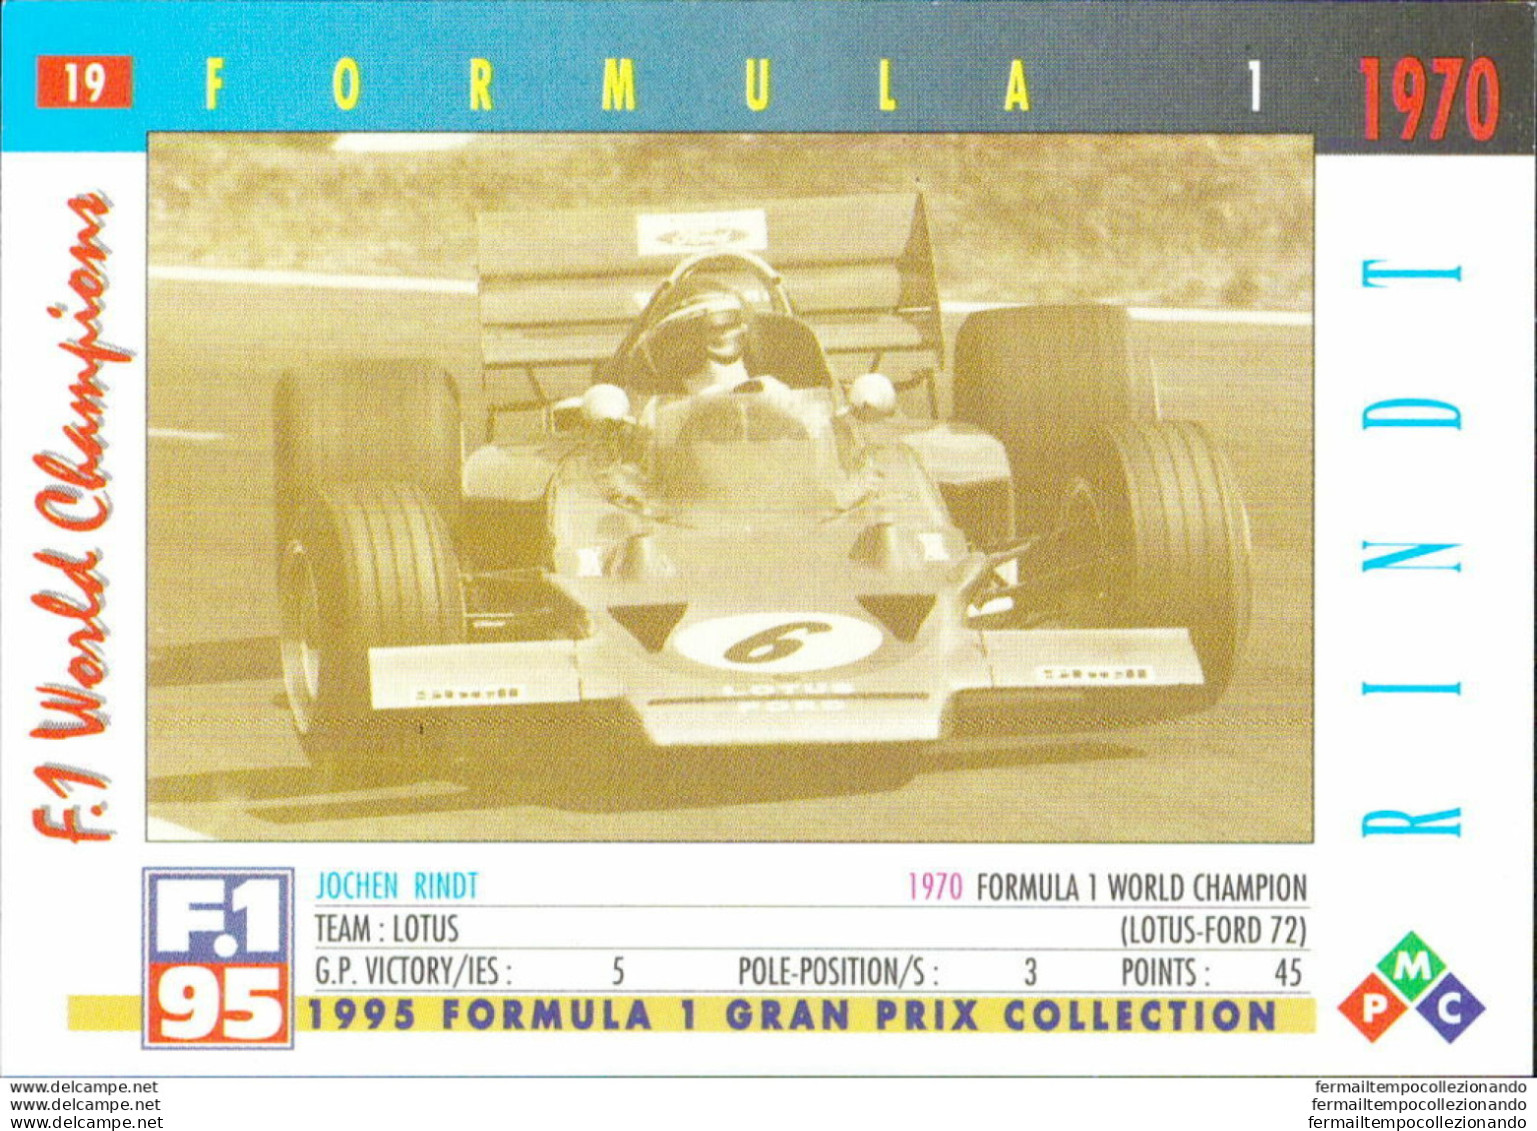 Bh19 1995 Formula 1 Gran Prix Collection Card Rindt N 19 - Catalogues